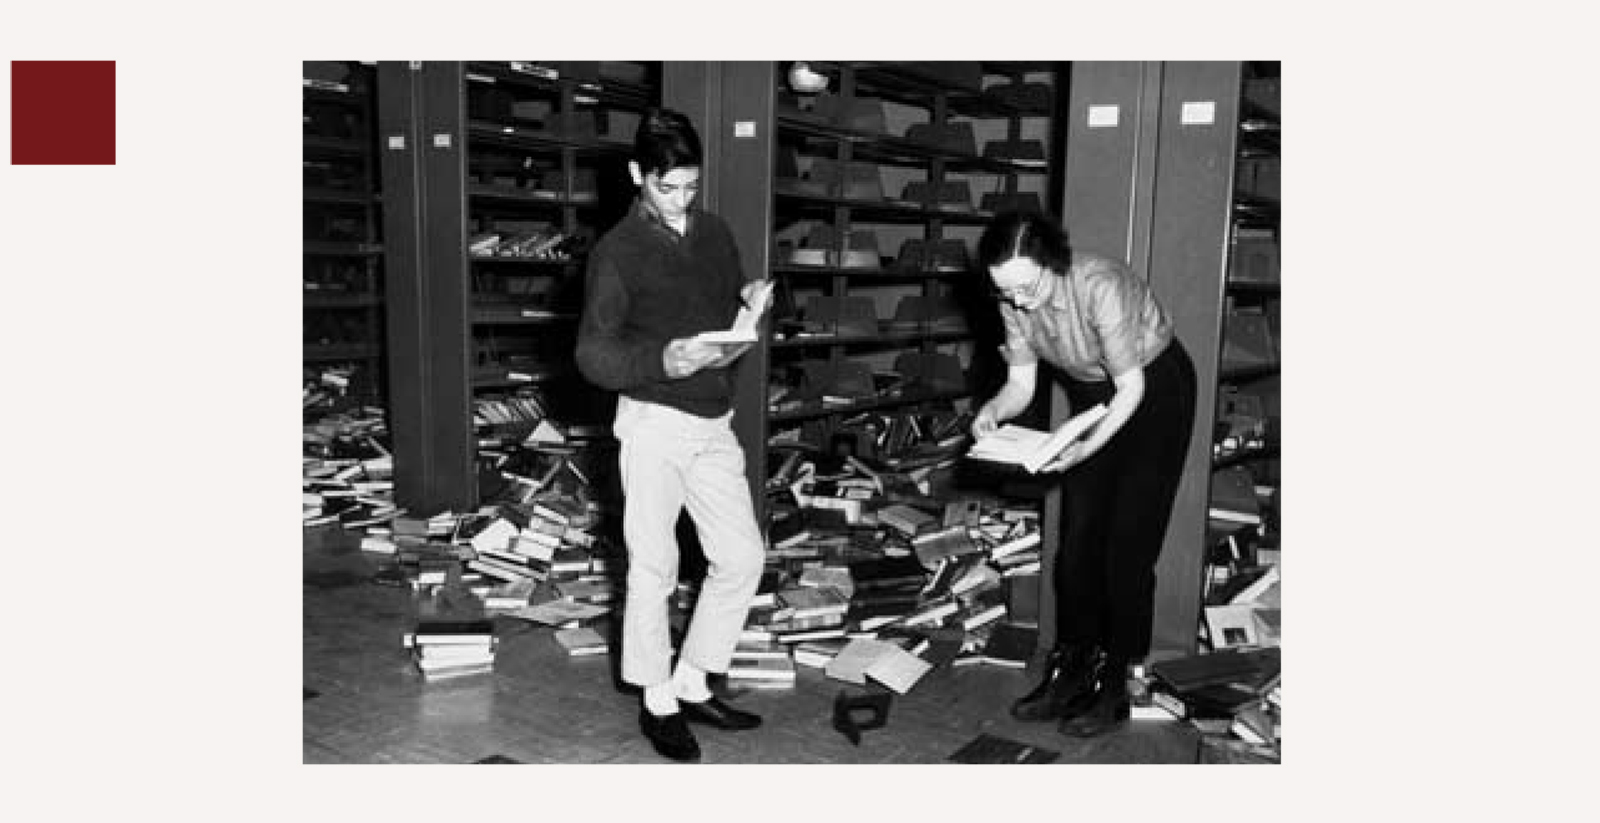 A photograph of toppled books at the Anchorage Community College Library in the aftermath of an earthquake on 27 March 1964.